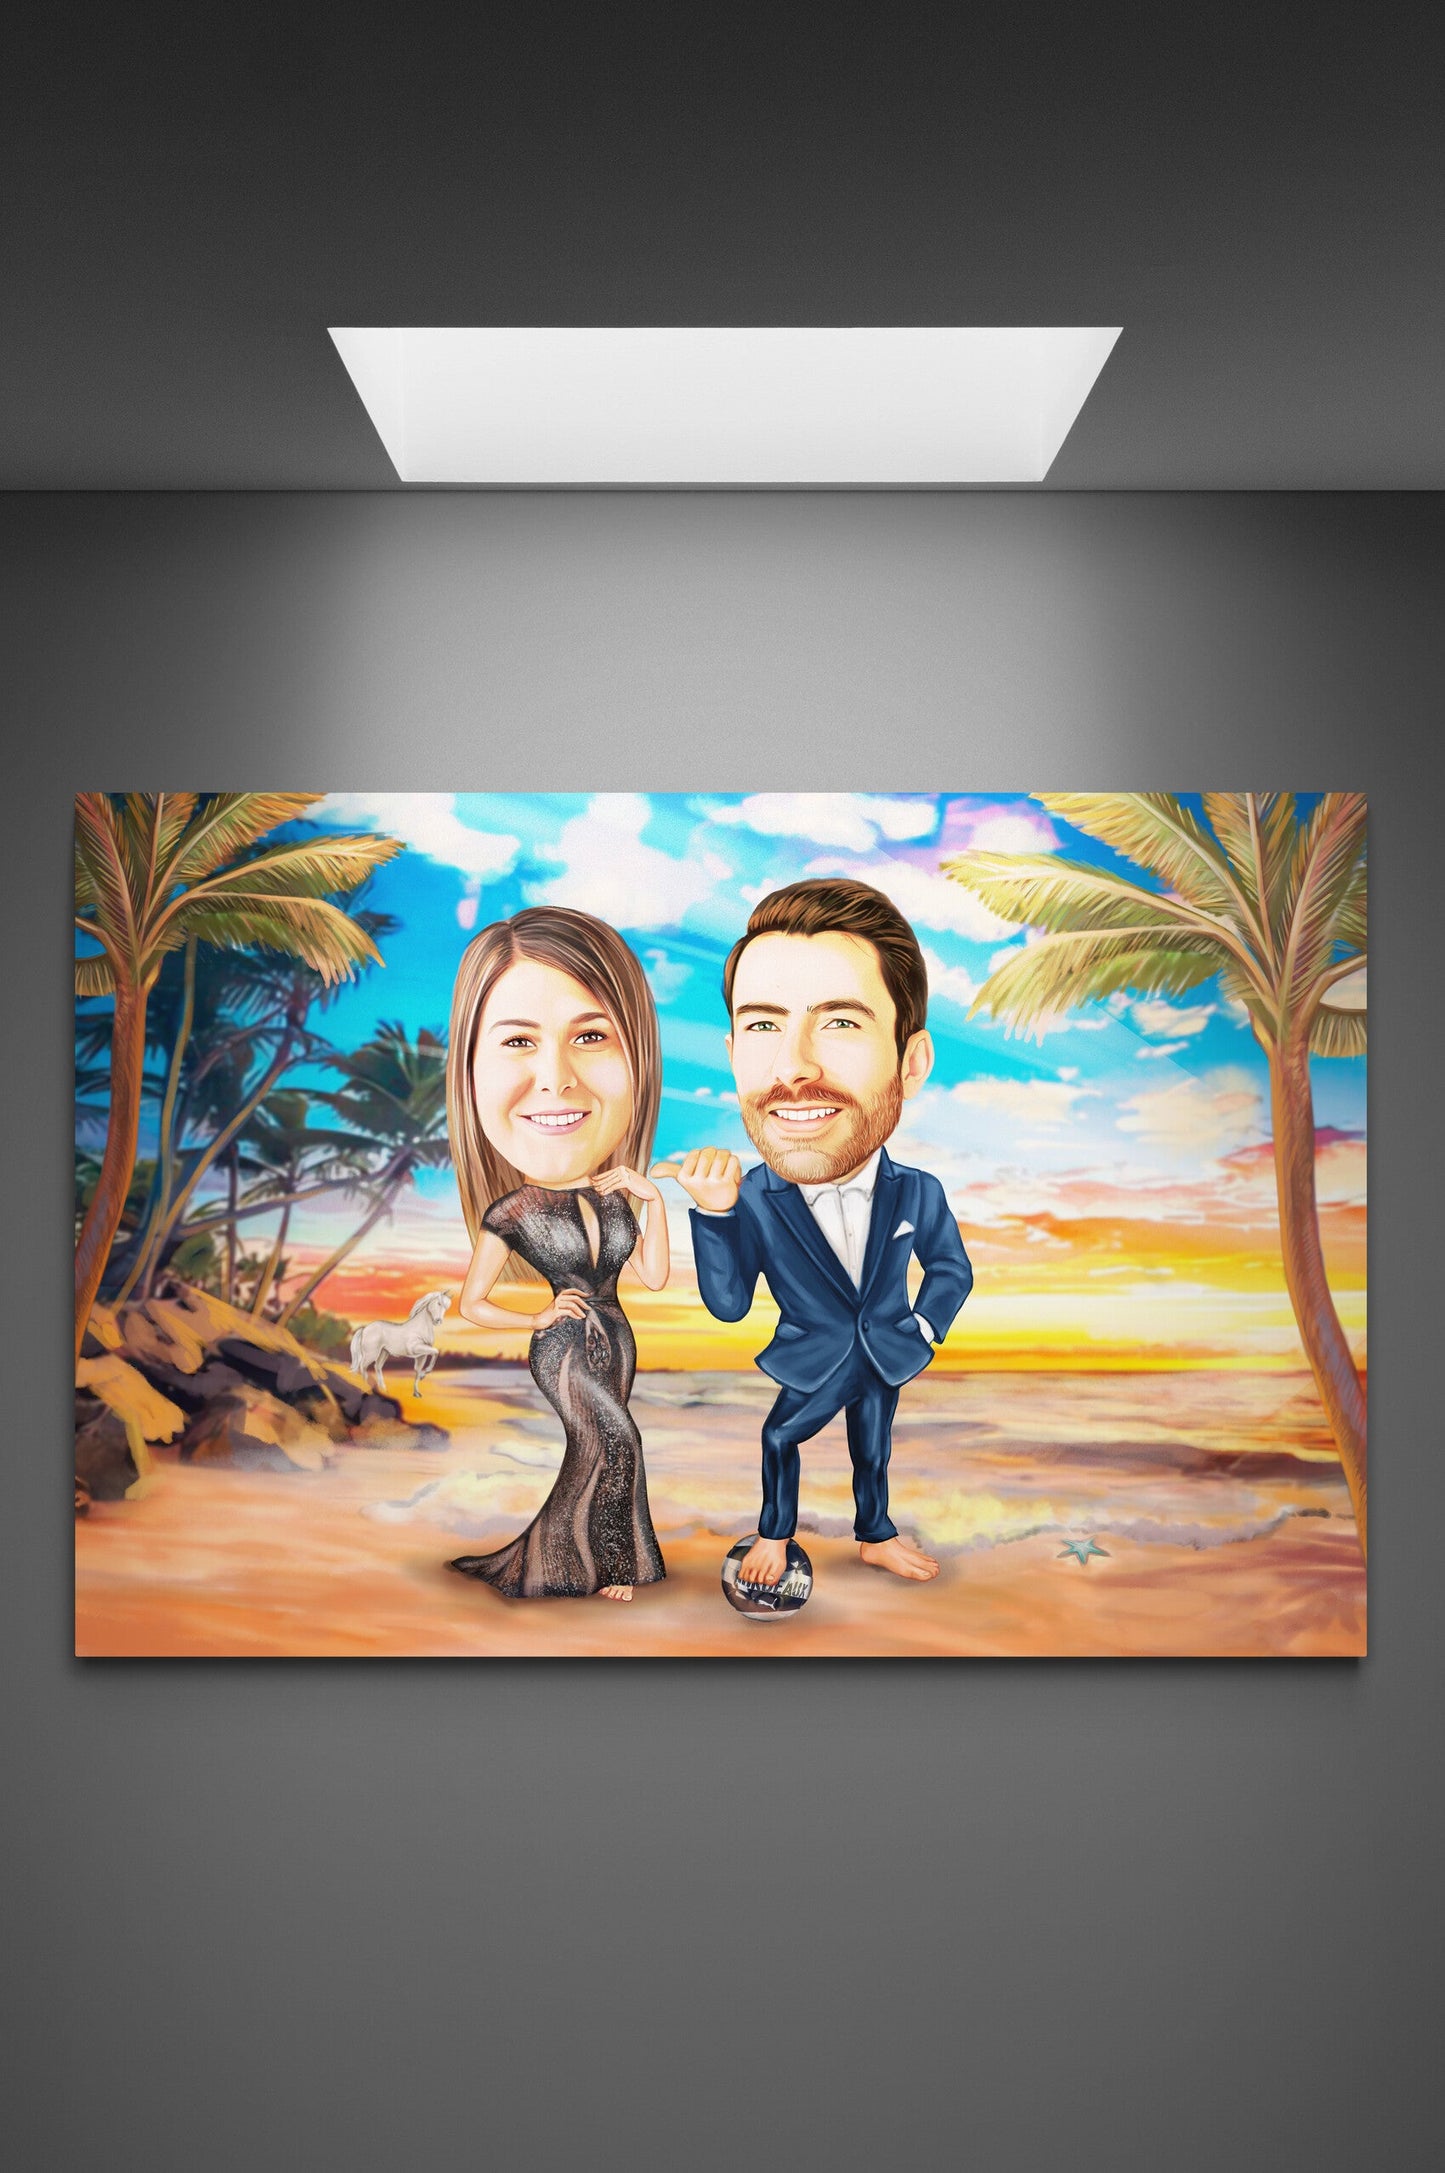 In love couple at sunset caricature